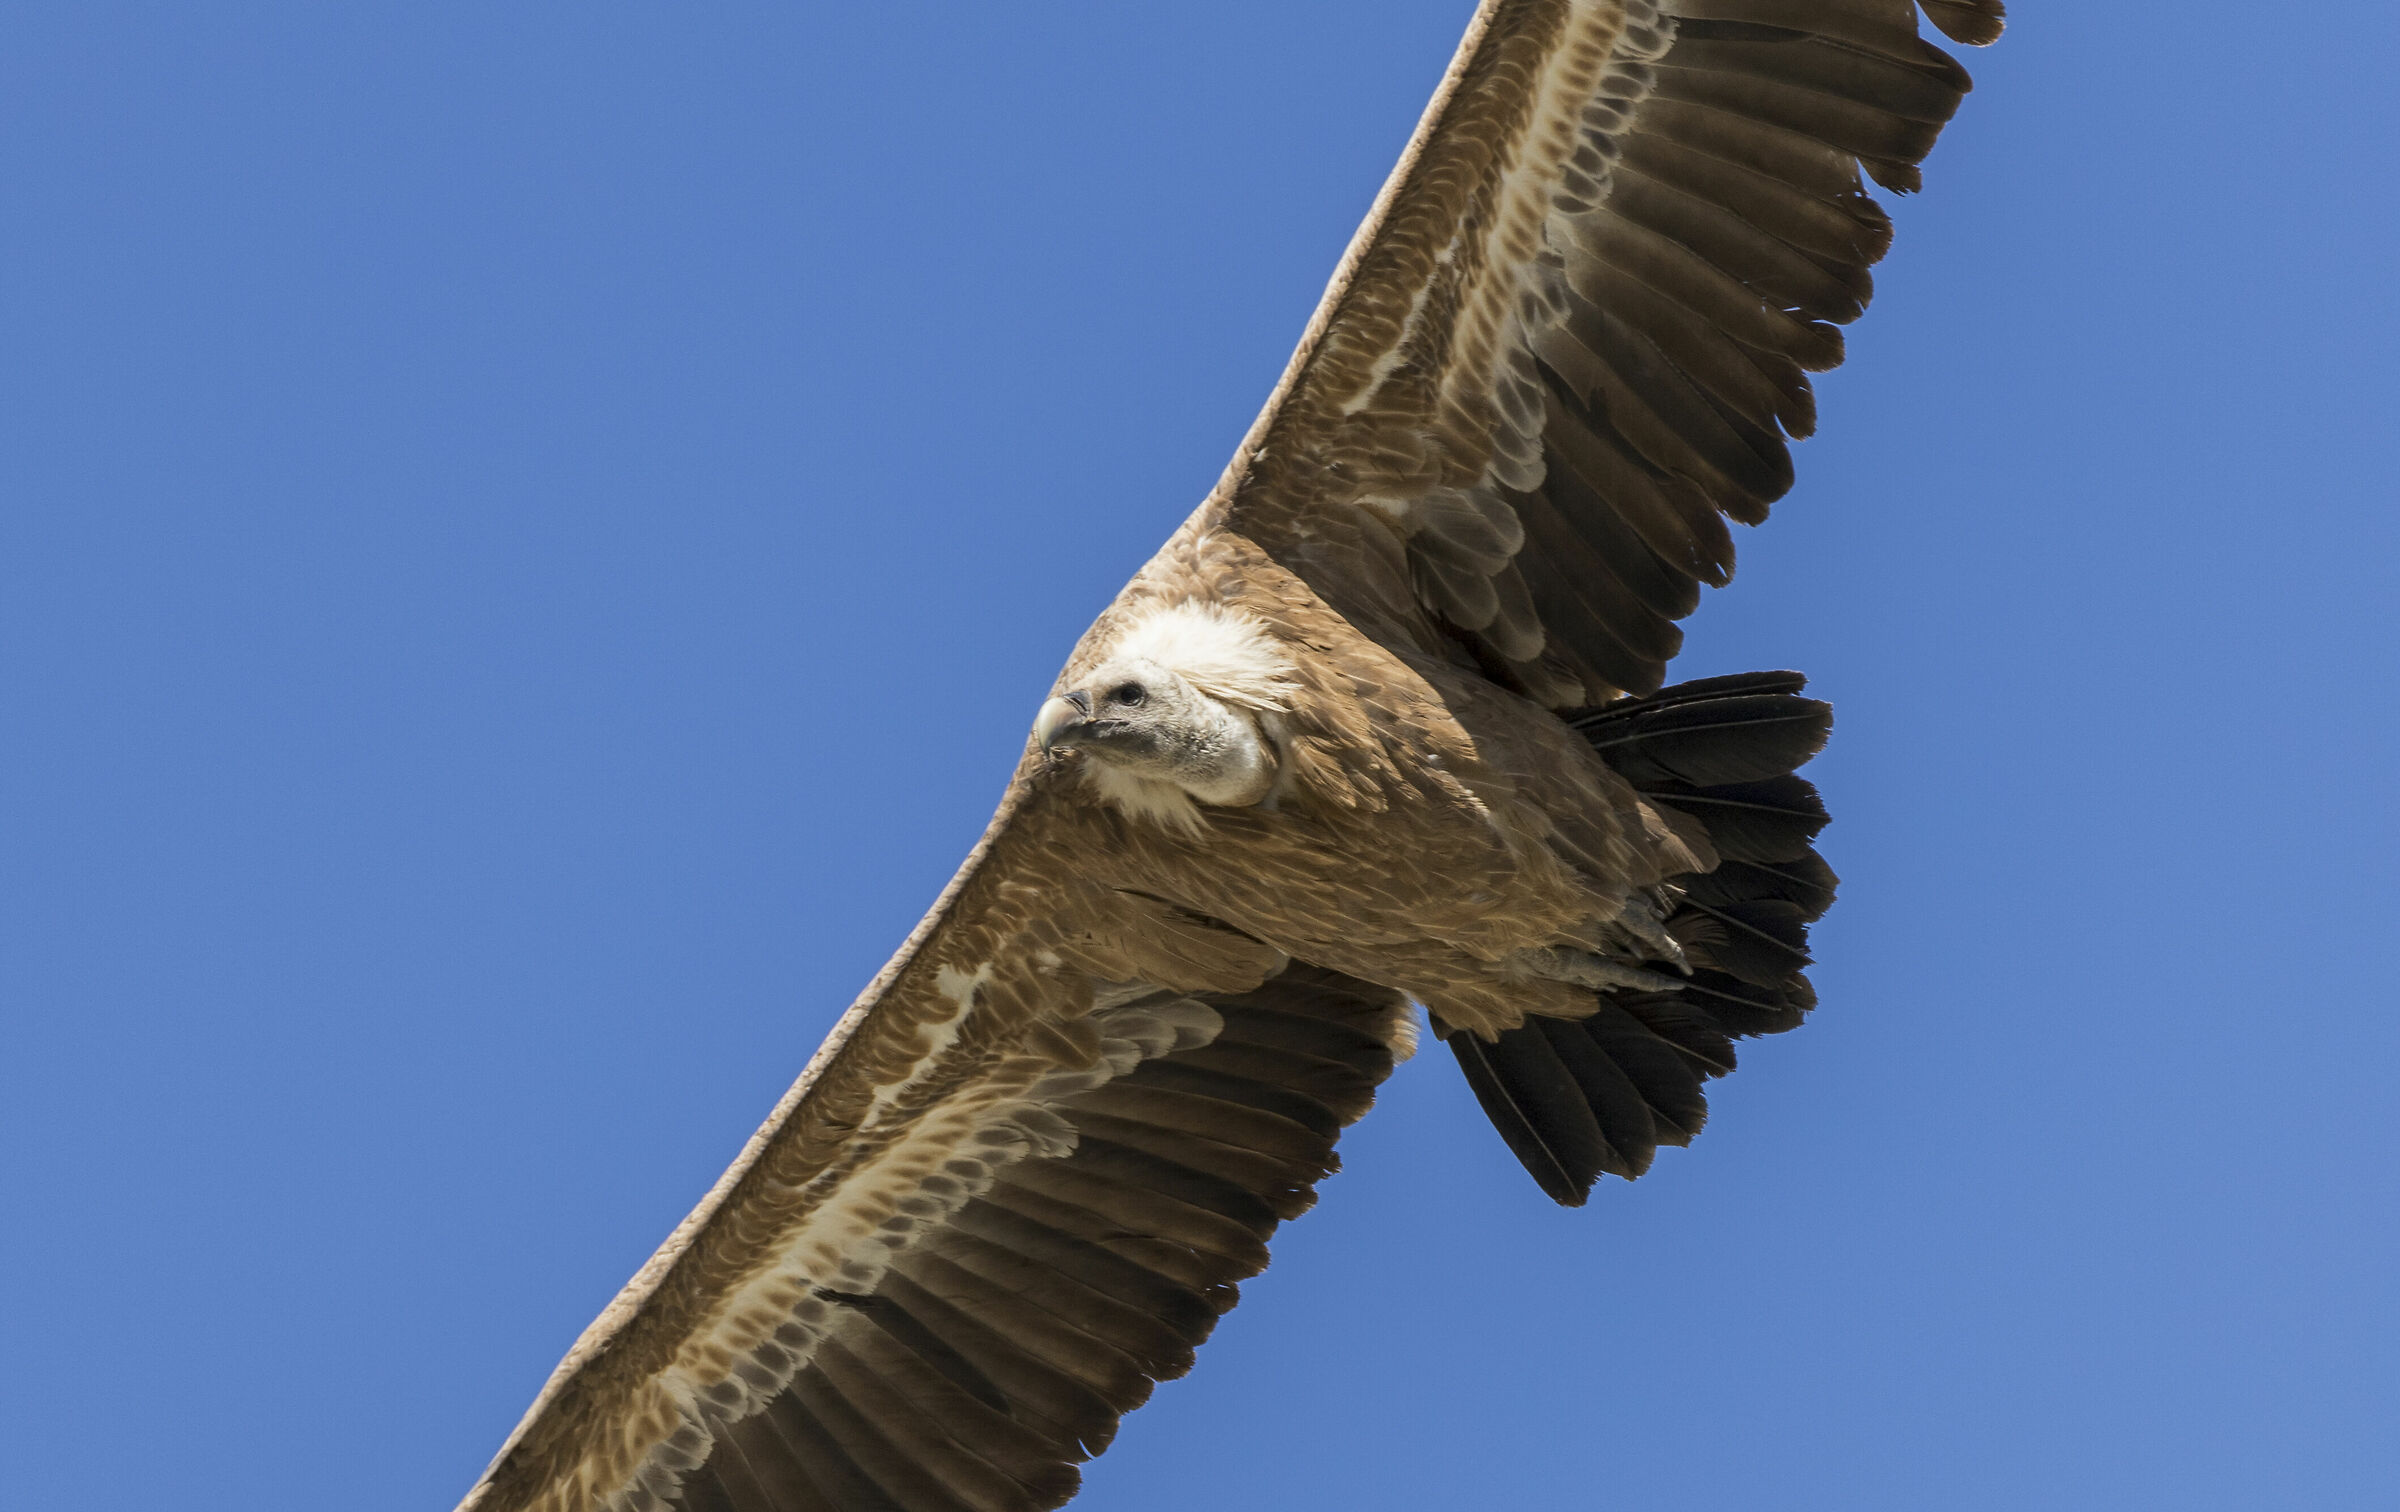 One-on-one with the griffon vulture ...